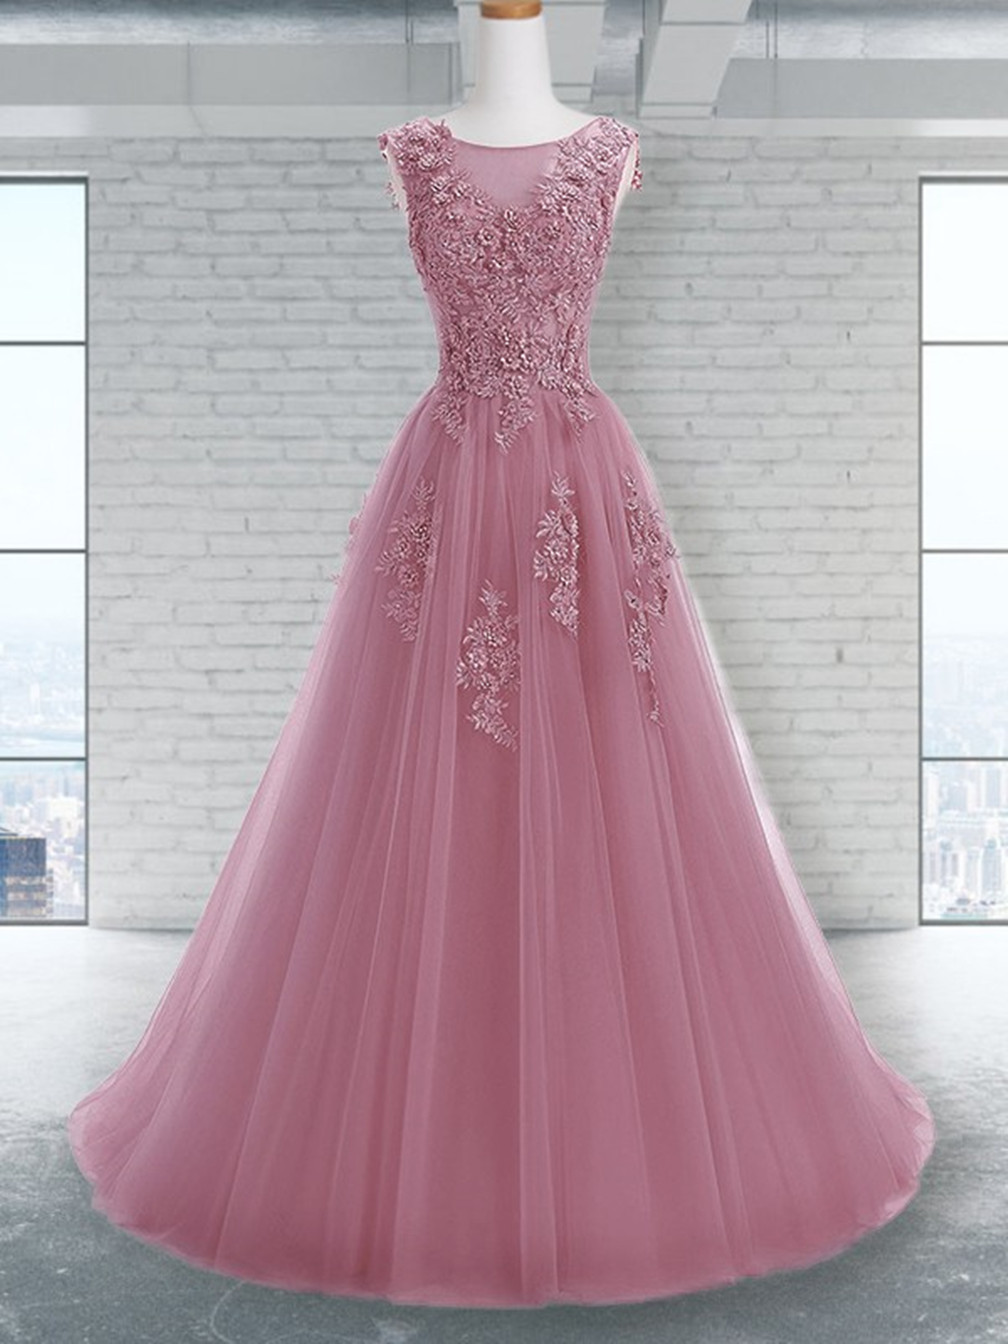 Women A-line/princess Lace Prom Dresses Long Sleeveless Evening Gowns Appliques Formal Party Dress Yp031